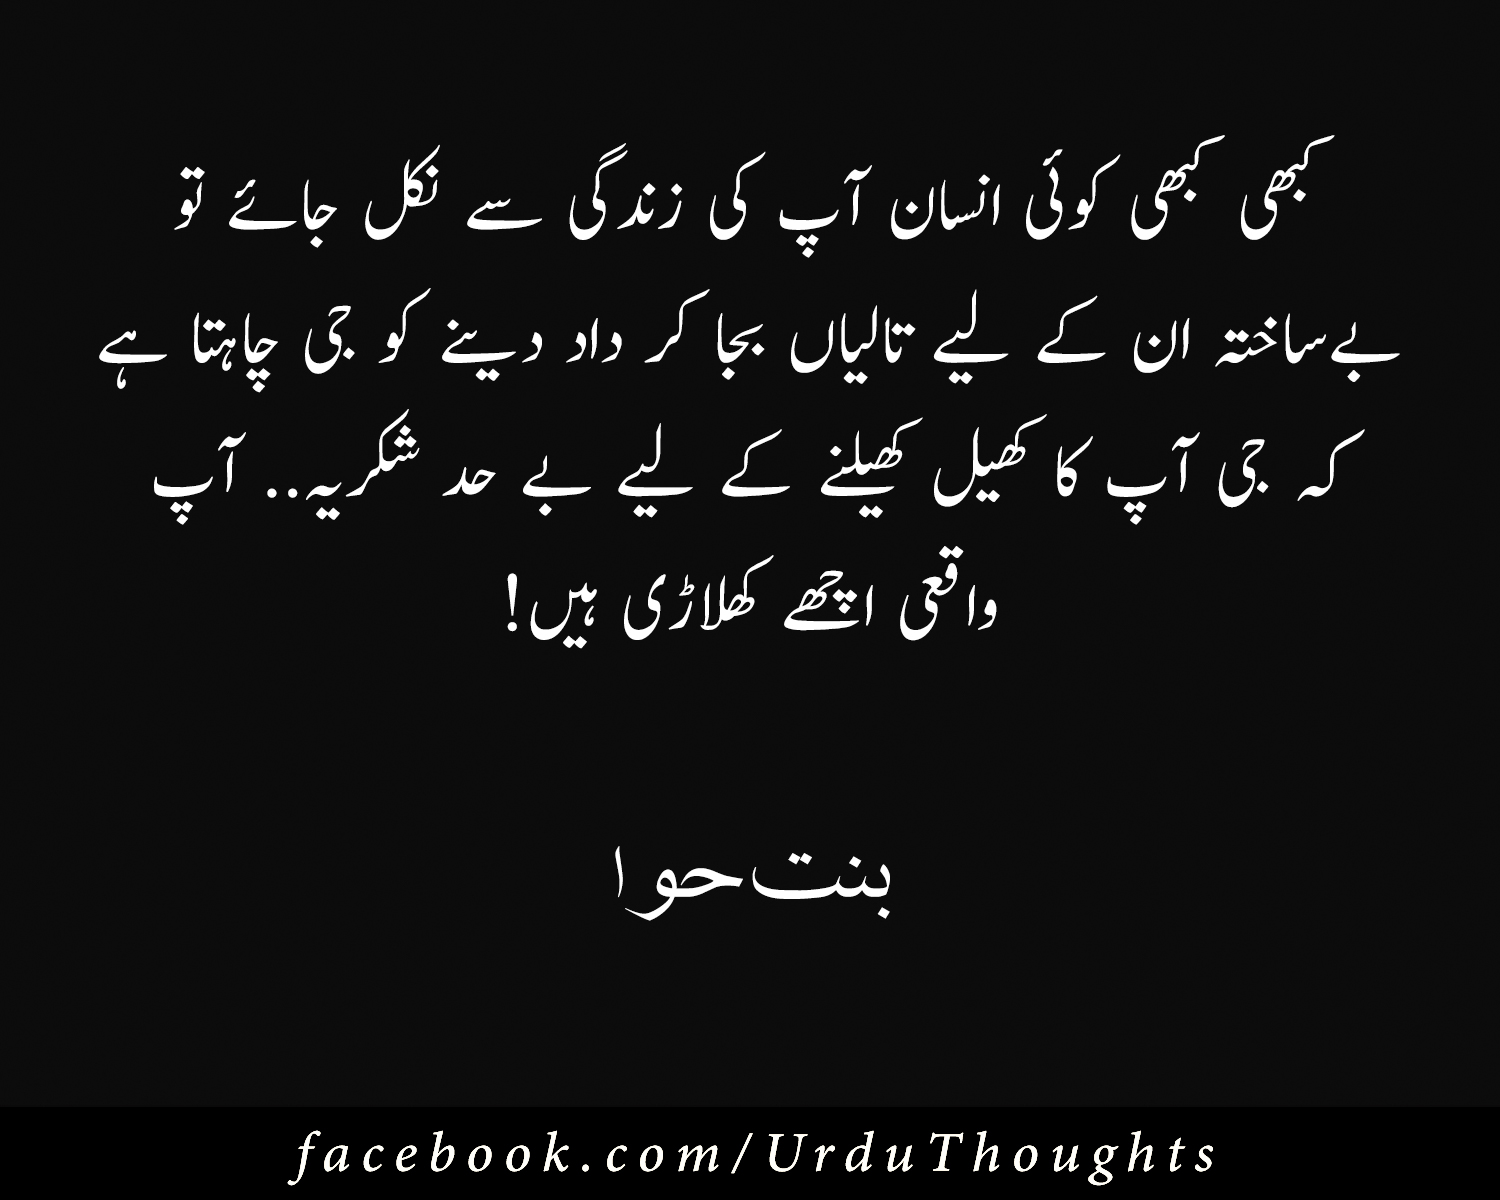 to your friends great quotes about success in Urdu famous quotes on success in Urdu life success quotes in Urdu success quotes for students in Urdu